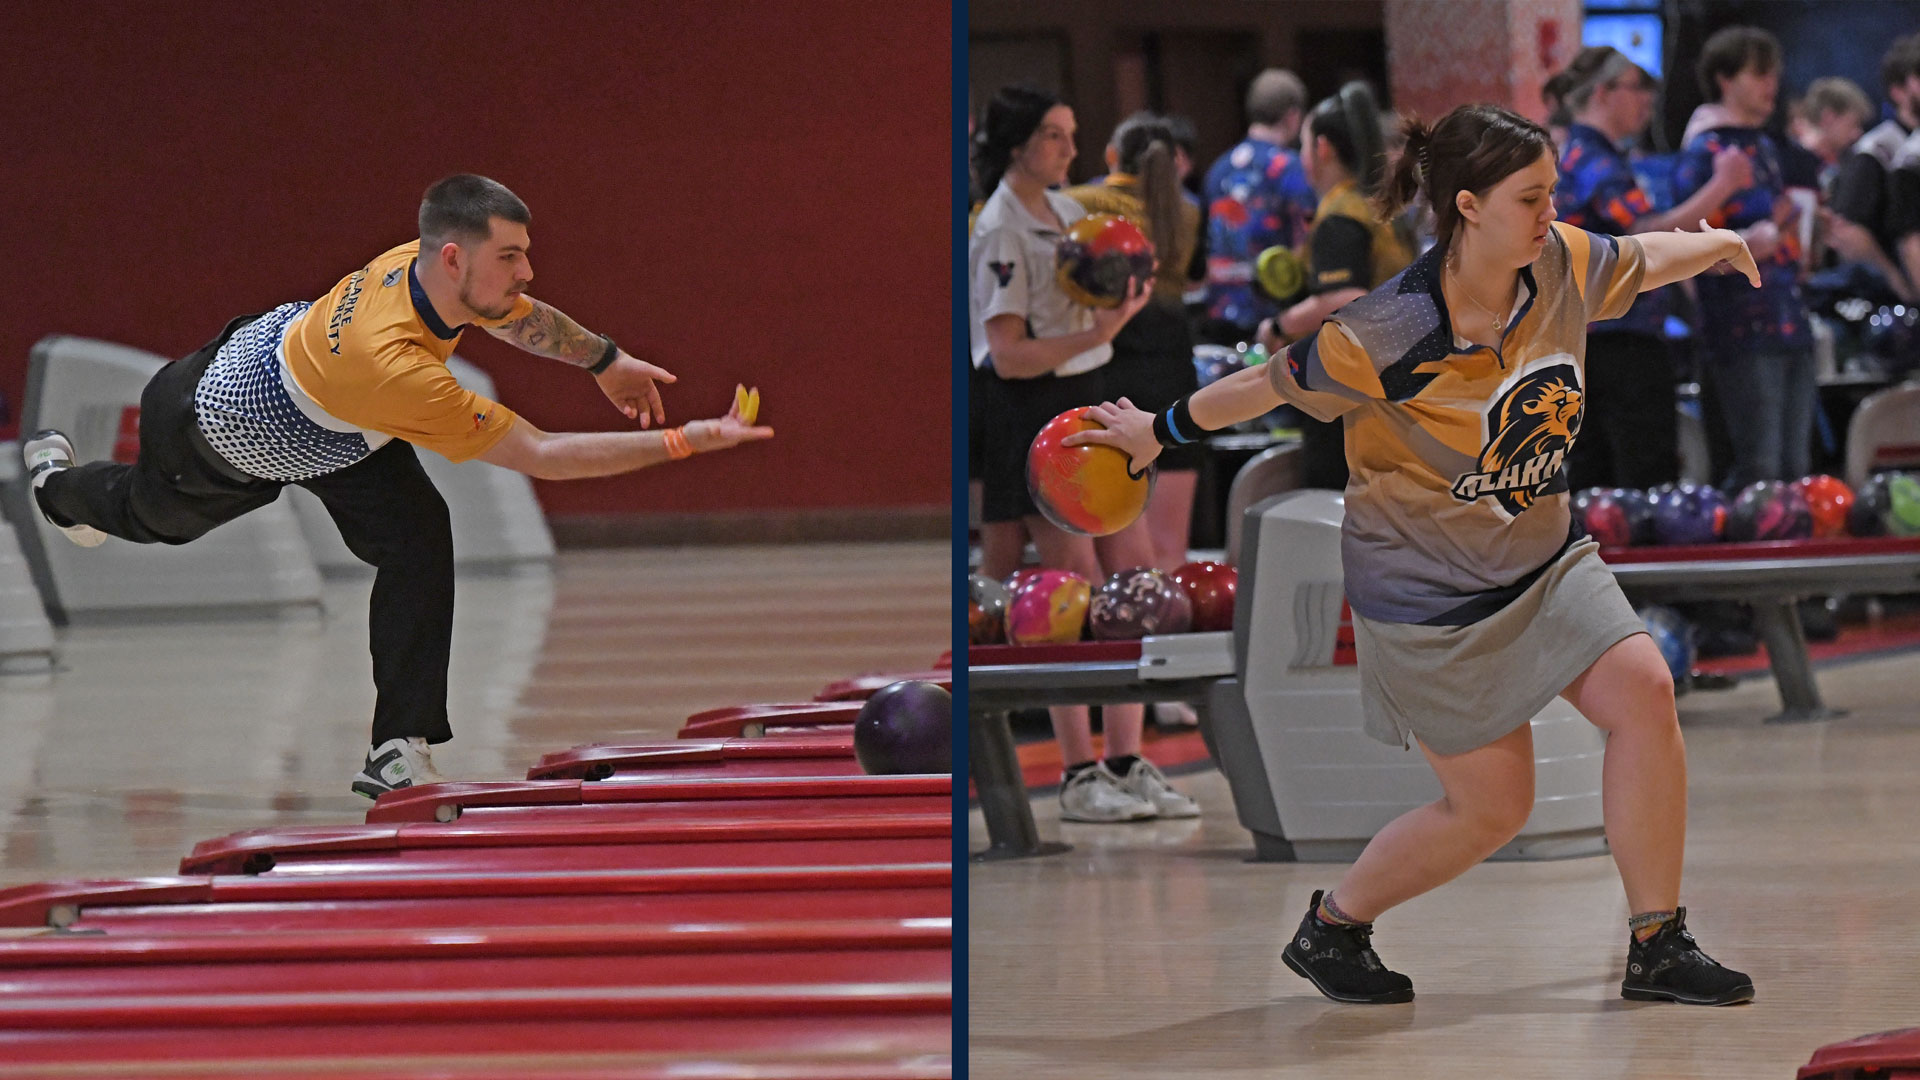 Pride bowling continues busy stretch with individual standouts at Mid Iowa Bowling Conference